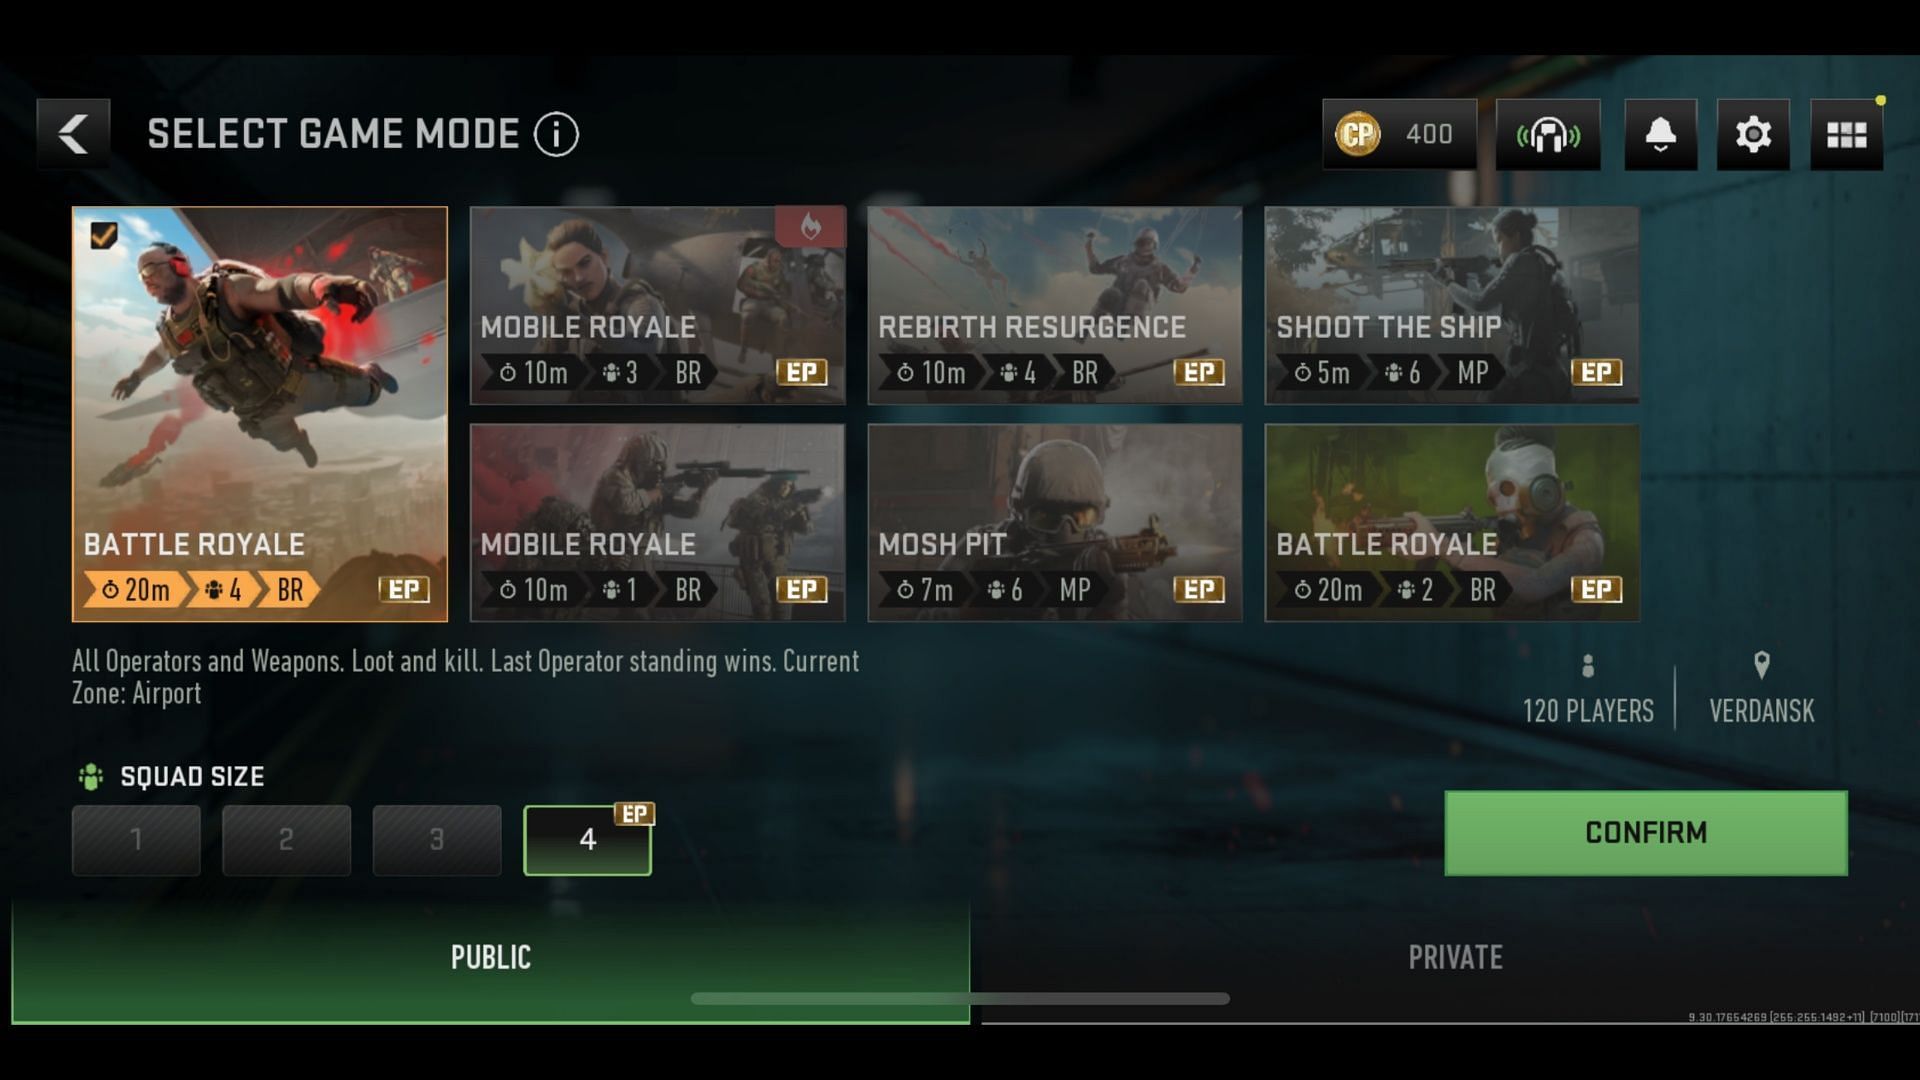 Available modes in WZ Mobile (Image via Activision)